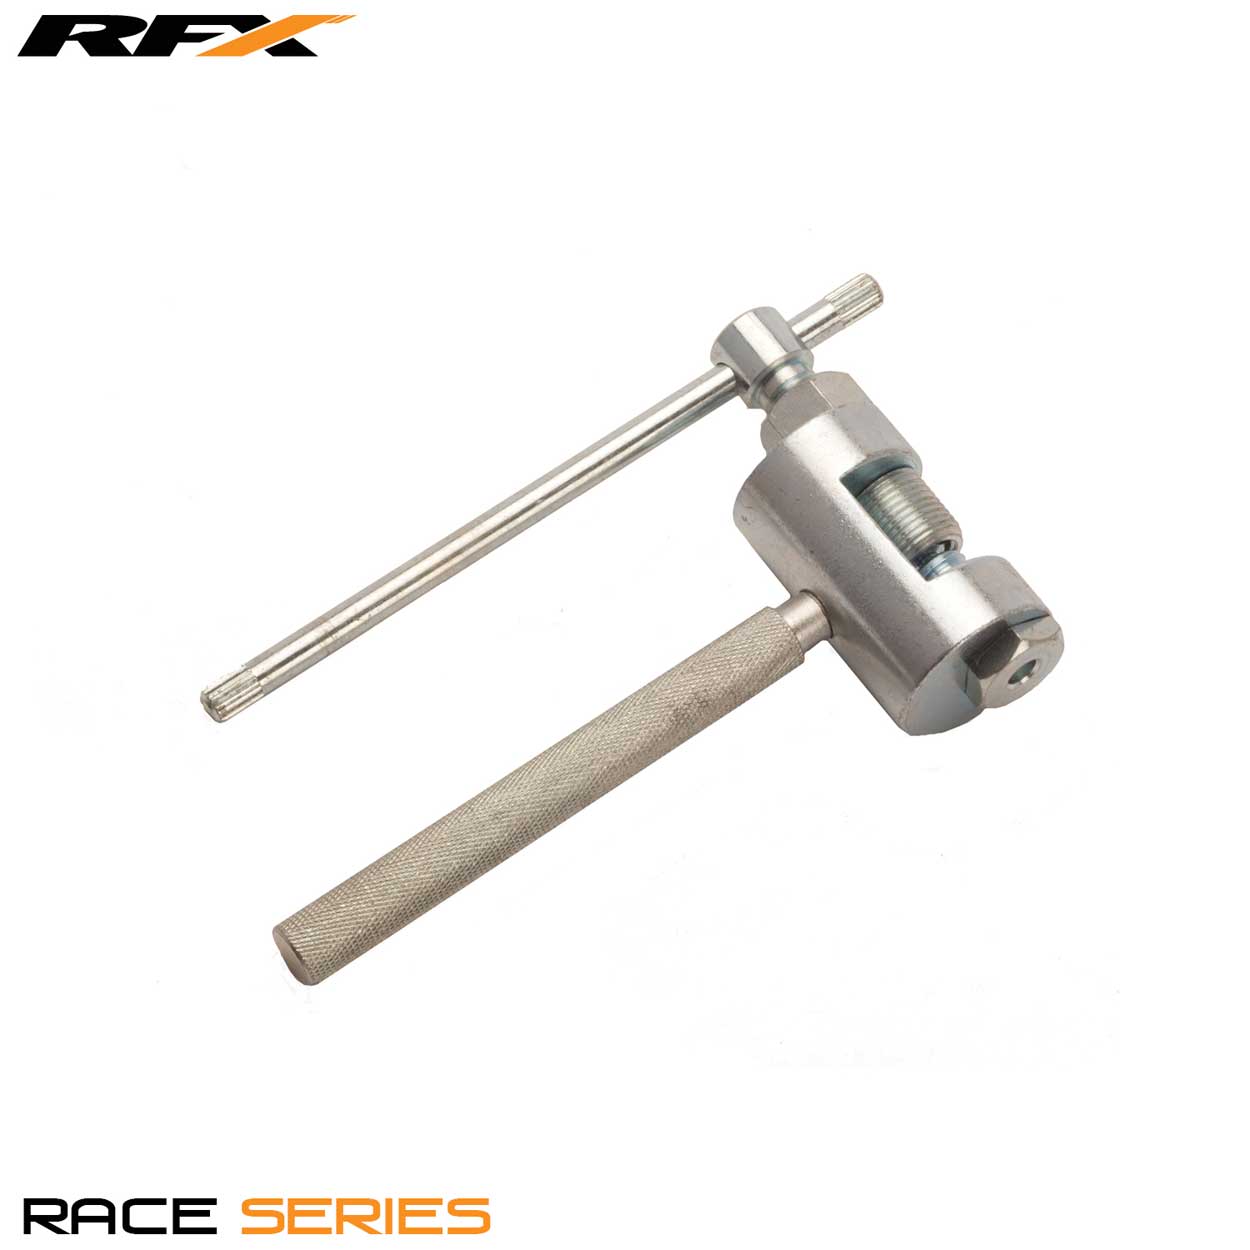 RFX Race Chain Breaker Heavy Duty (Silver) Universal for use with 520-530 chains - Silver - RFX